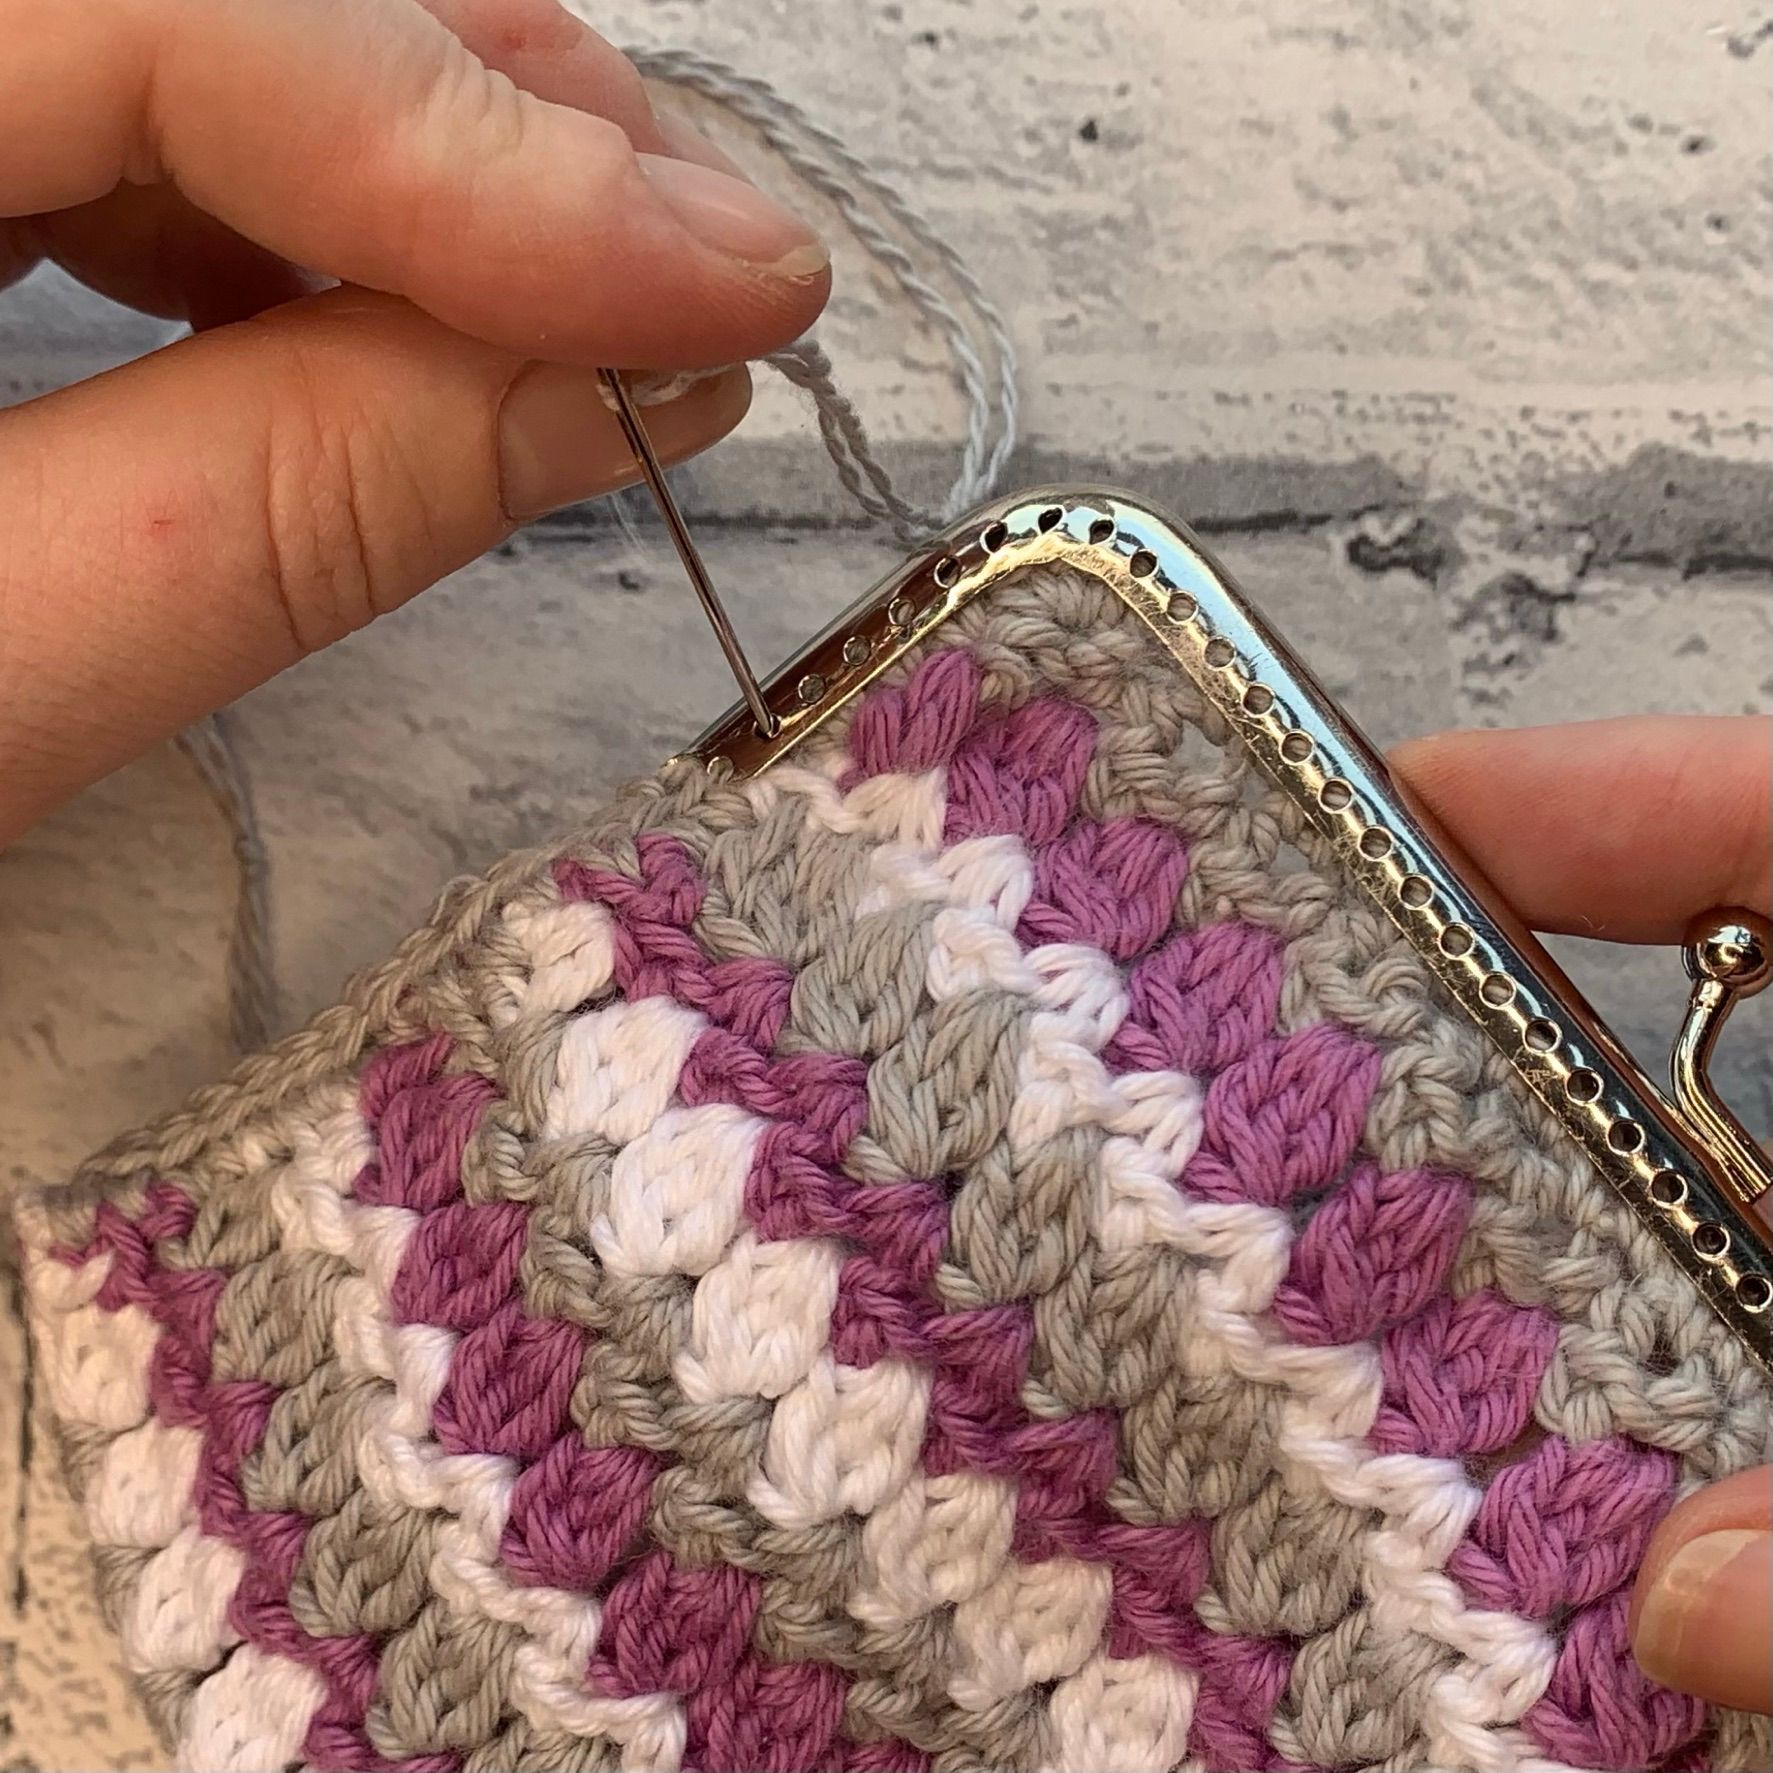 How to sew on a purse frame